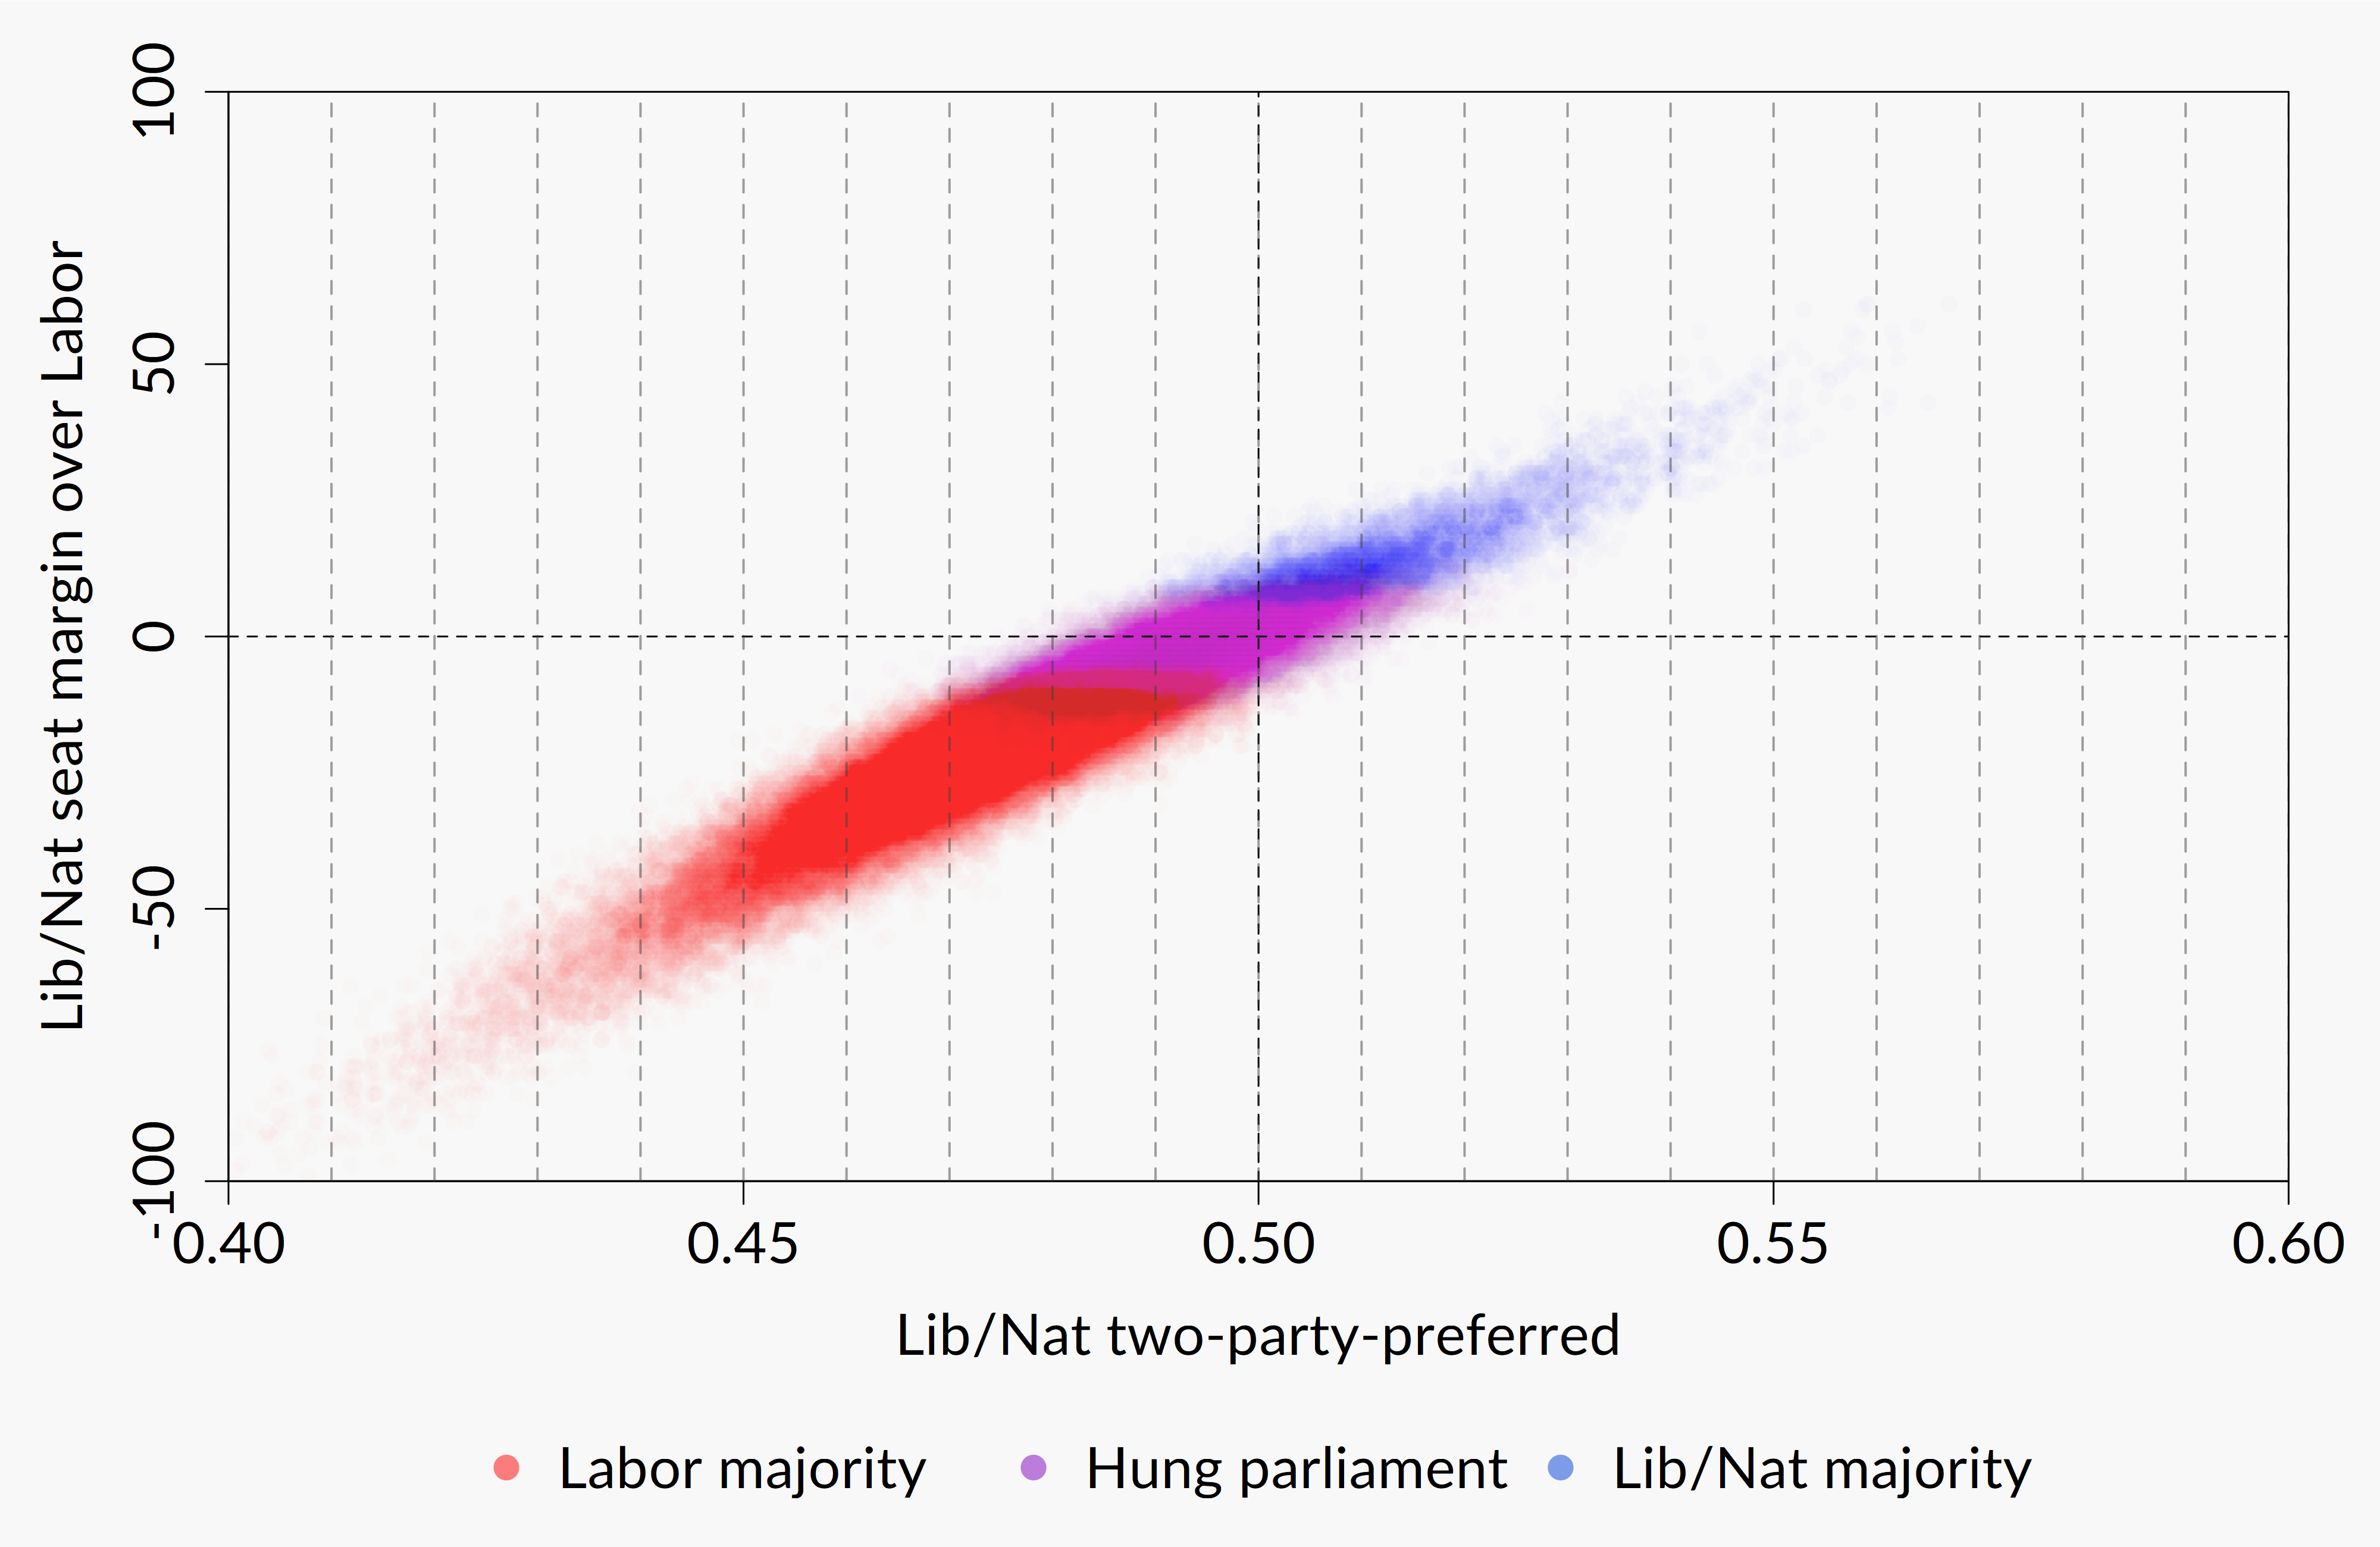 Simulations plotted by L/NC seat margin and L/NC 2pp.